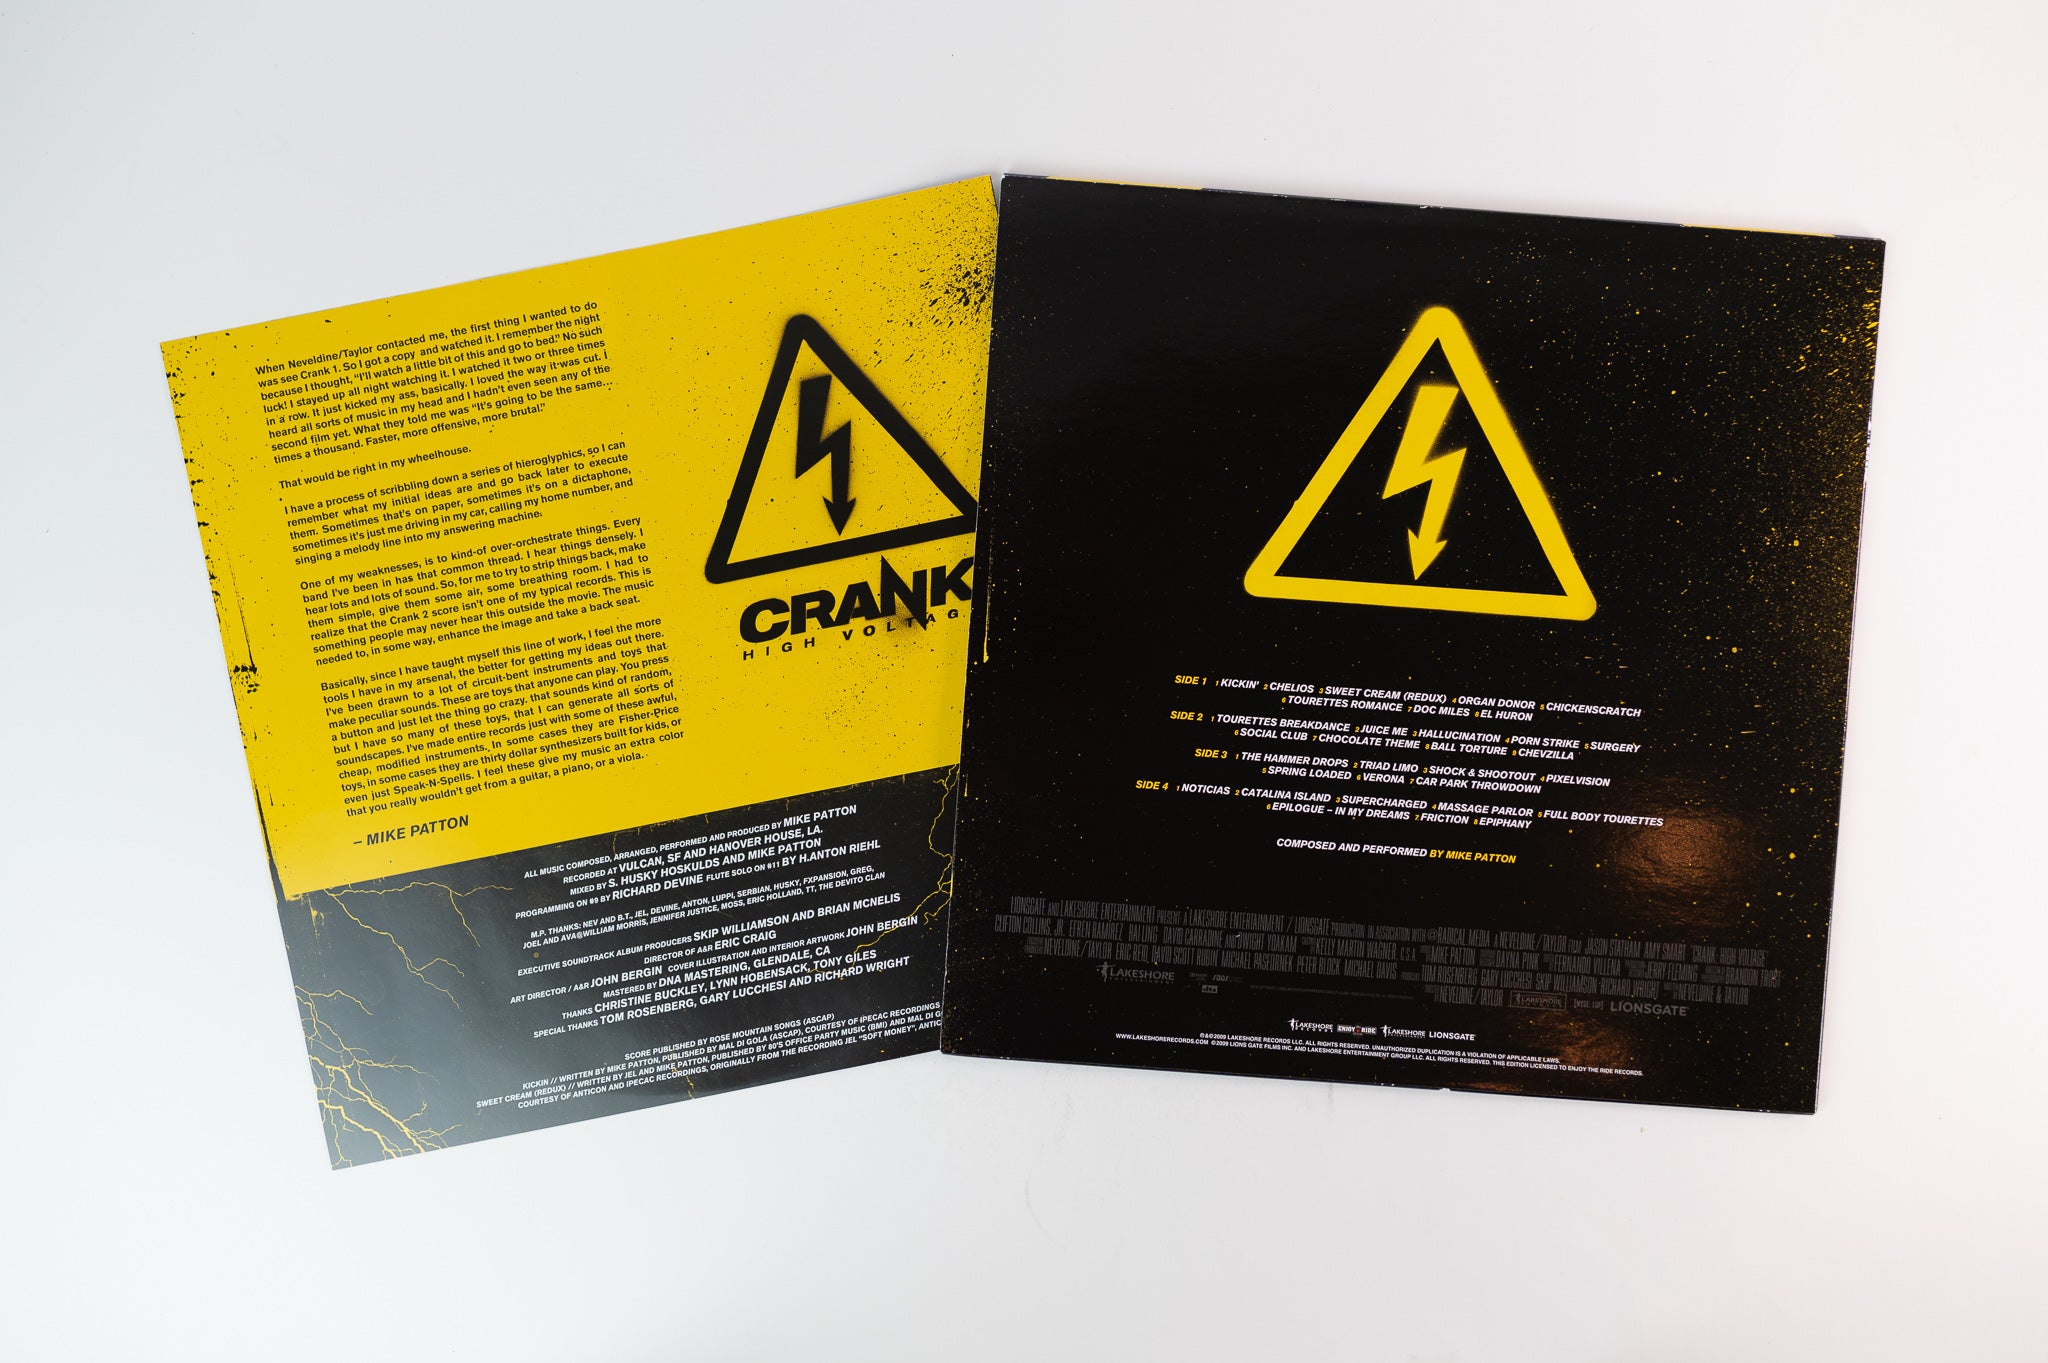 Mike Patton - Crank: High Voltage (Original Motion Picture Soundtrack) on Enjoy the Ride  Limited Half Black Half Clear with Yellow Splatter